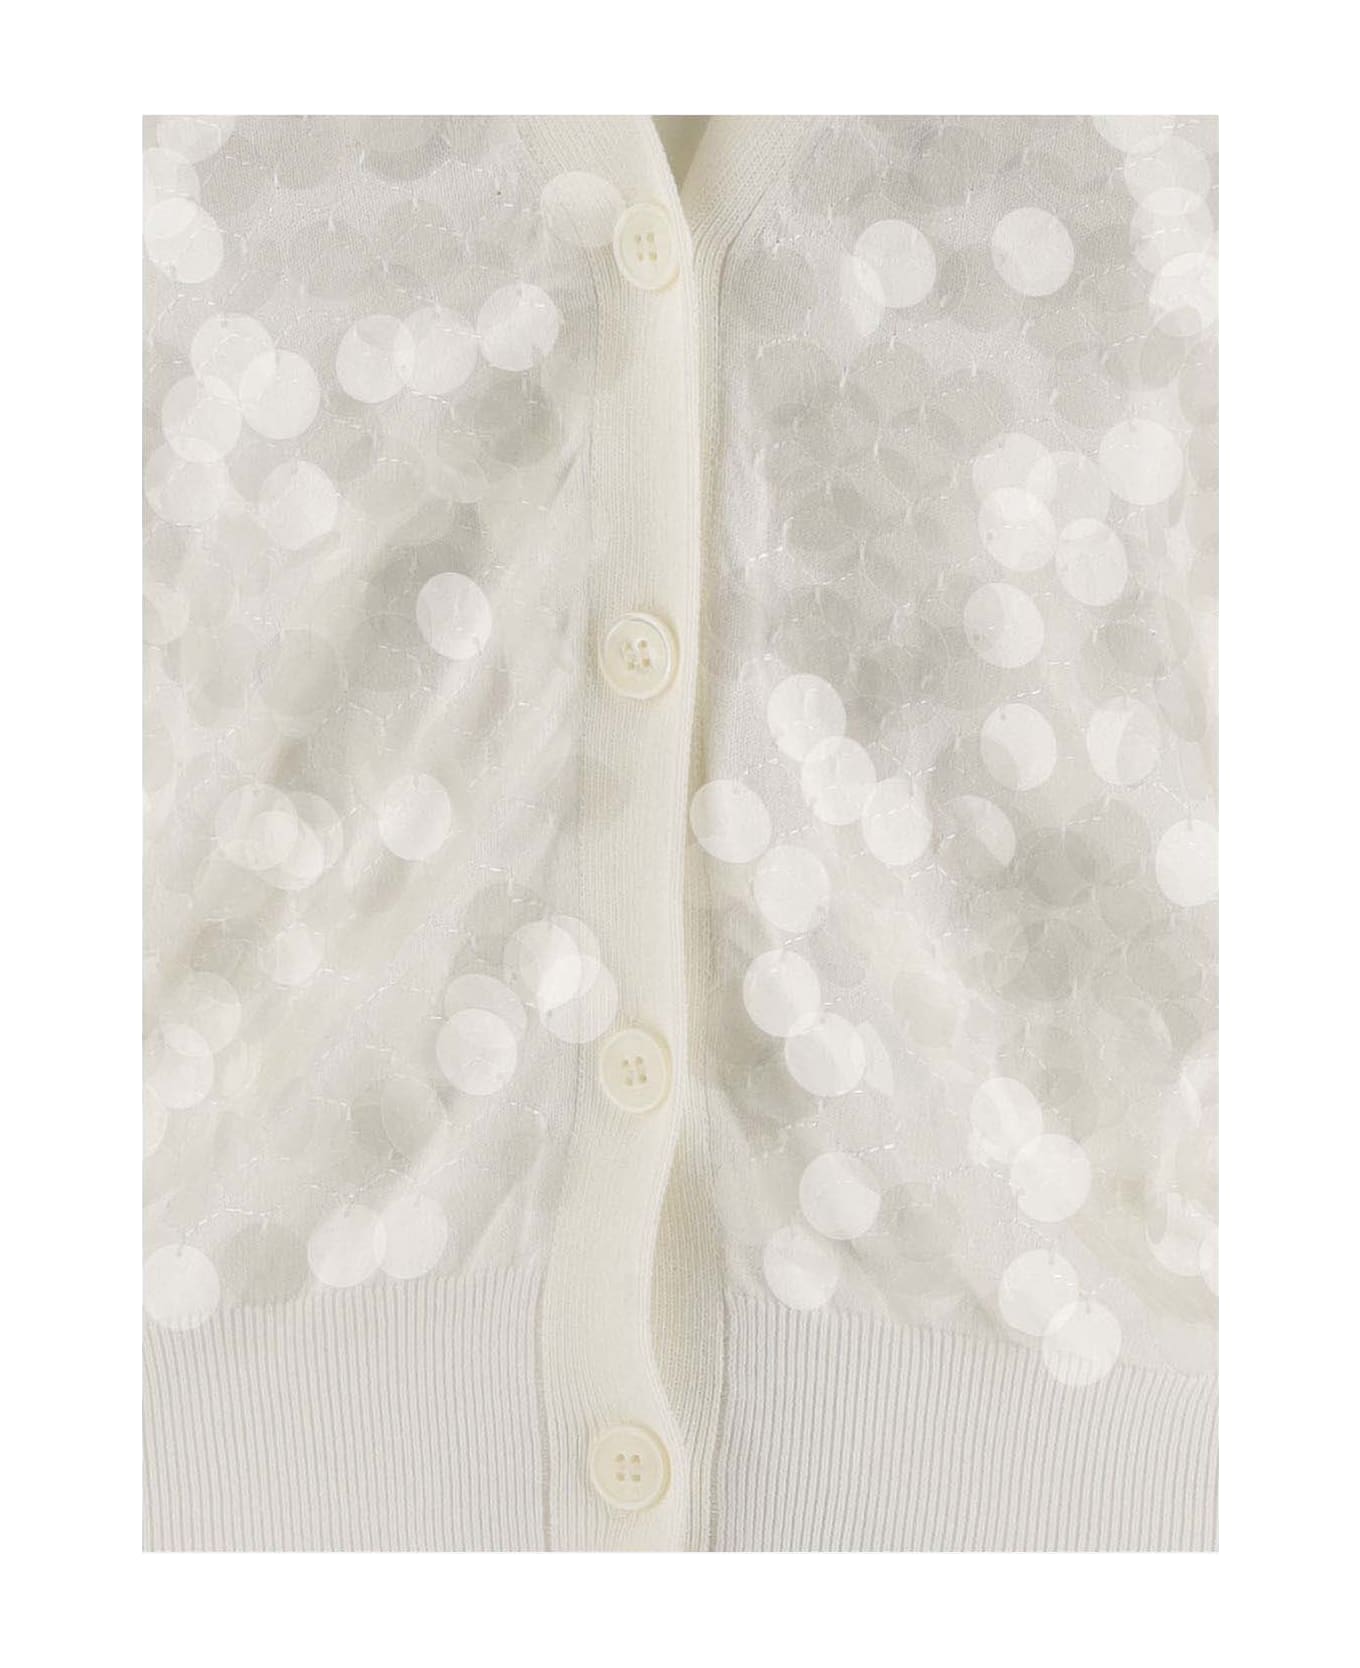 N.21 Sequined Cotton Cardigan - White